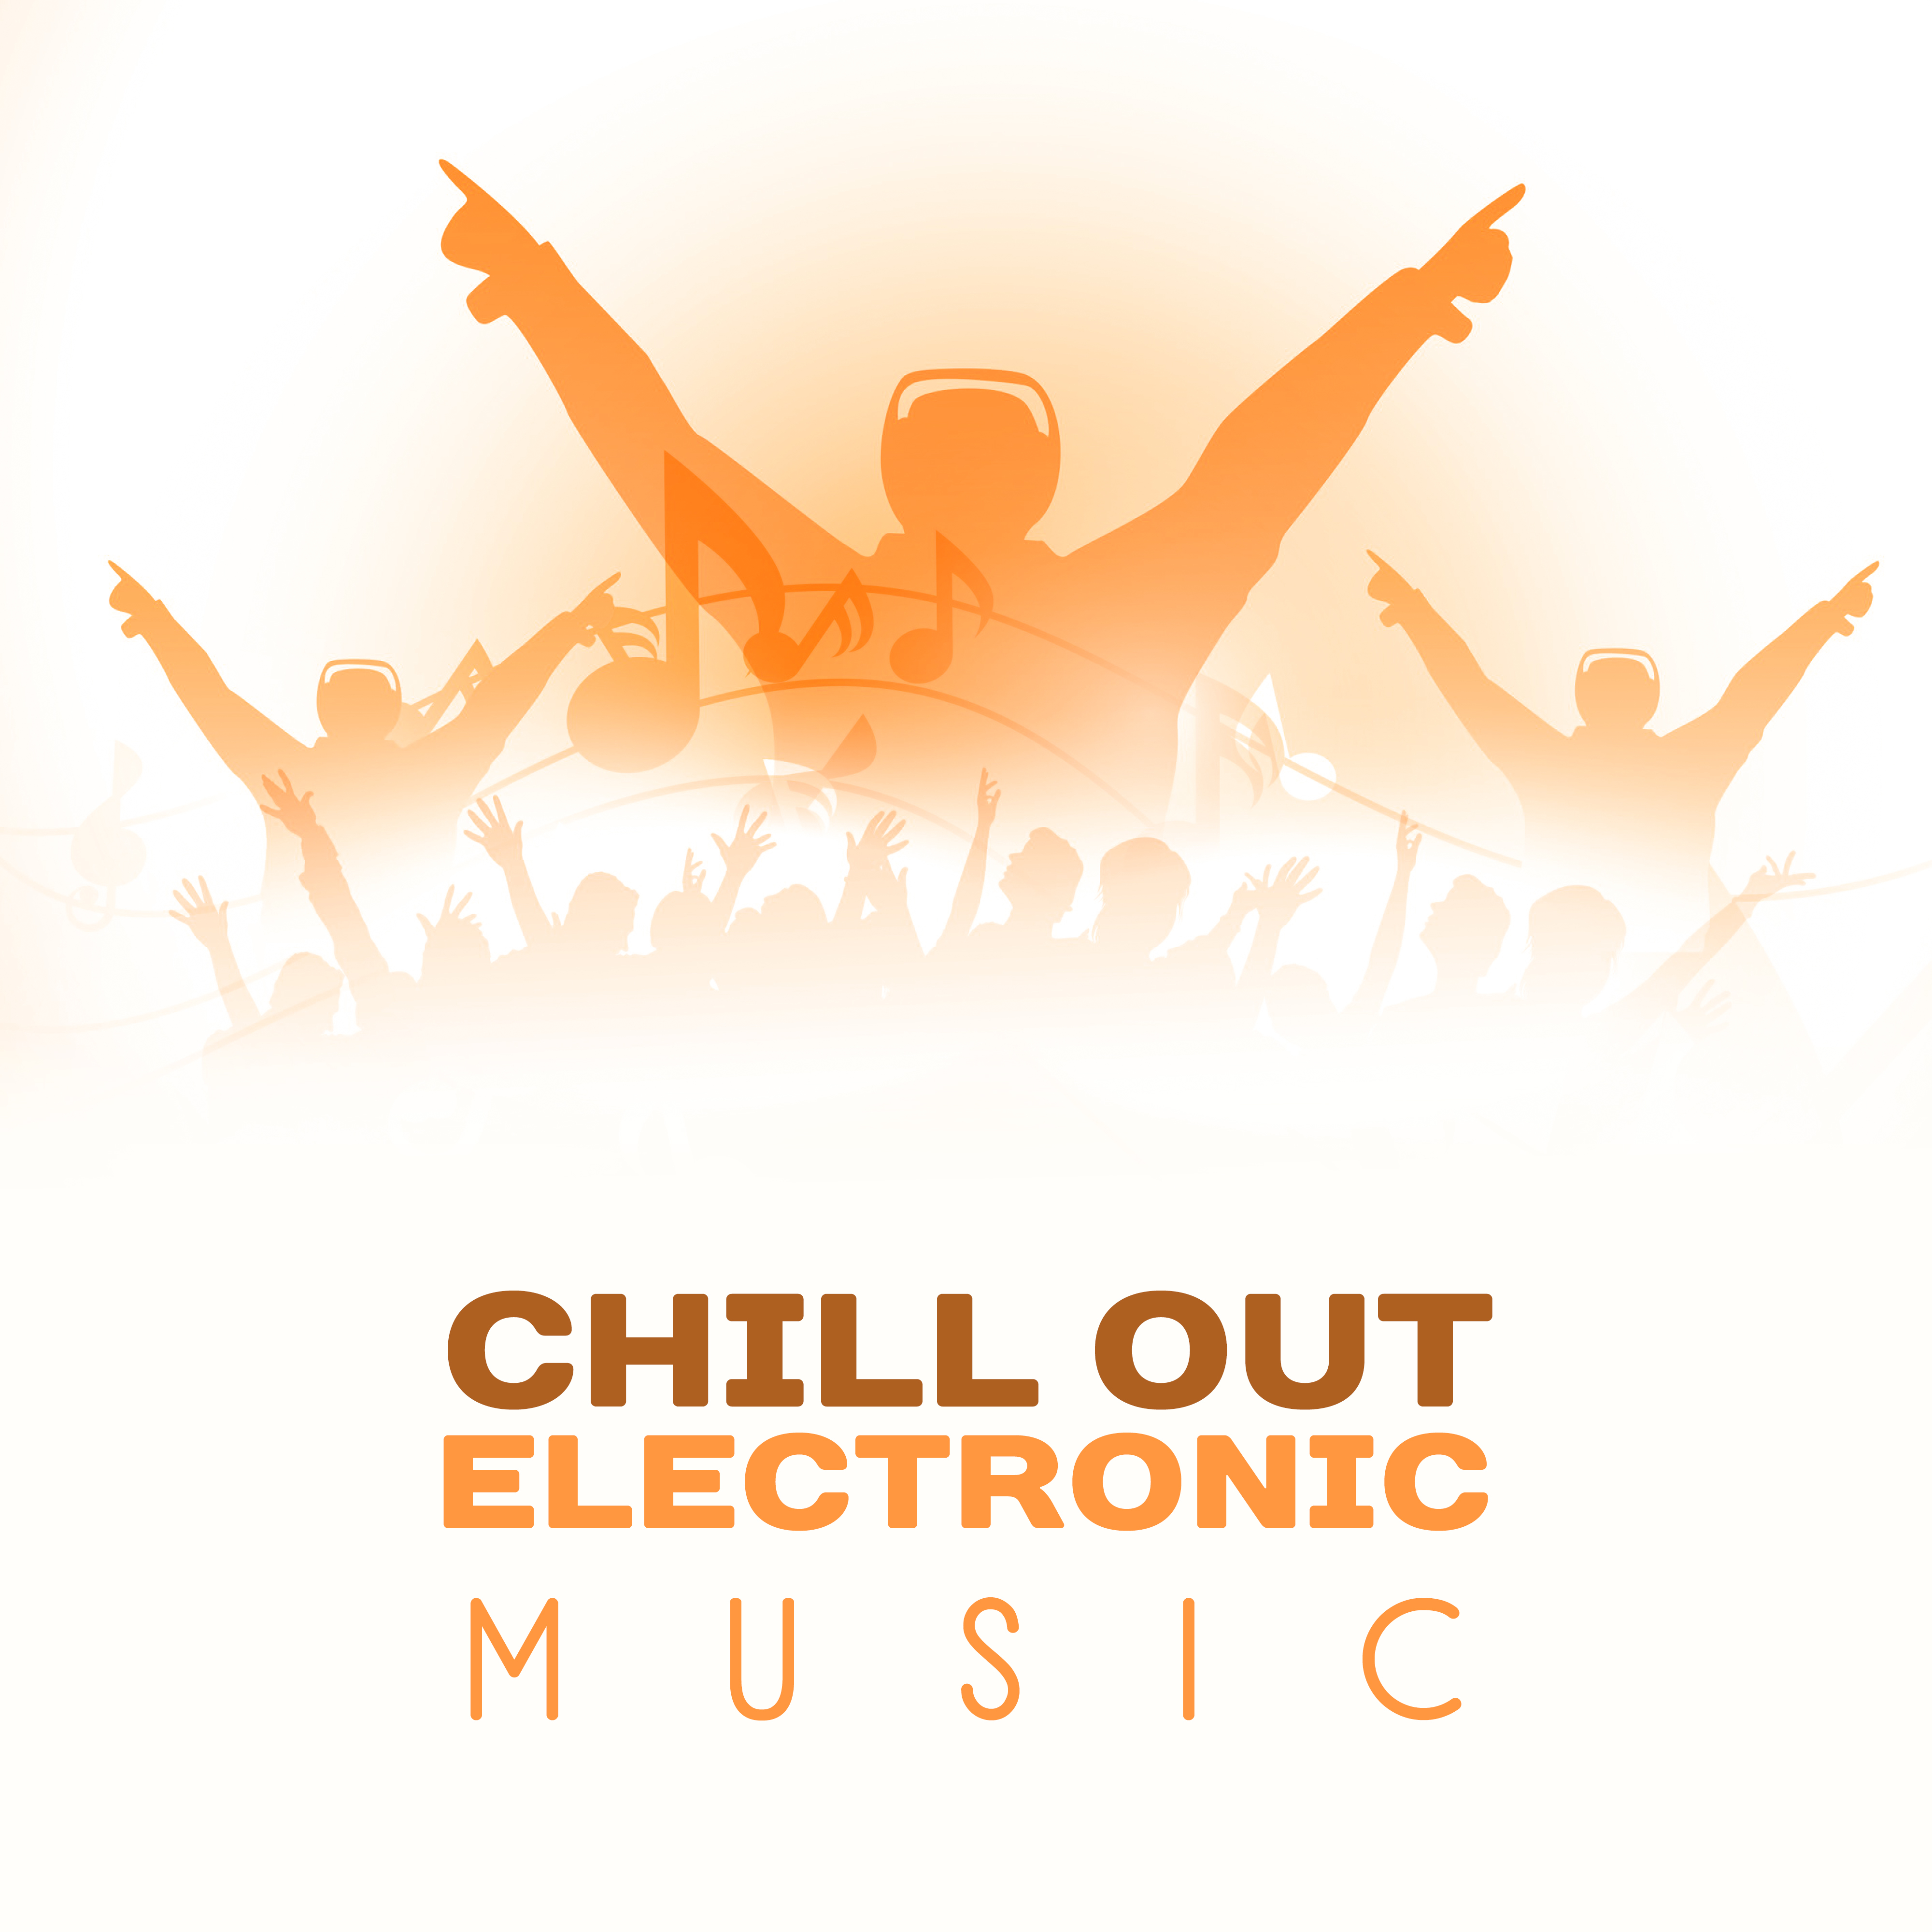 Chill Out Electronic Music – Summer Songs 2017, Soft Vibes, Best Chill Out Music